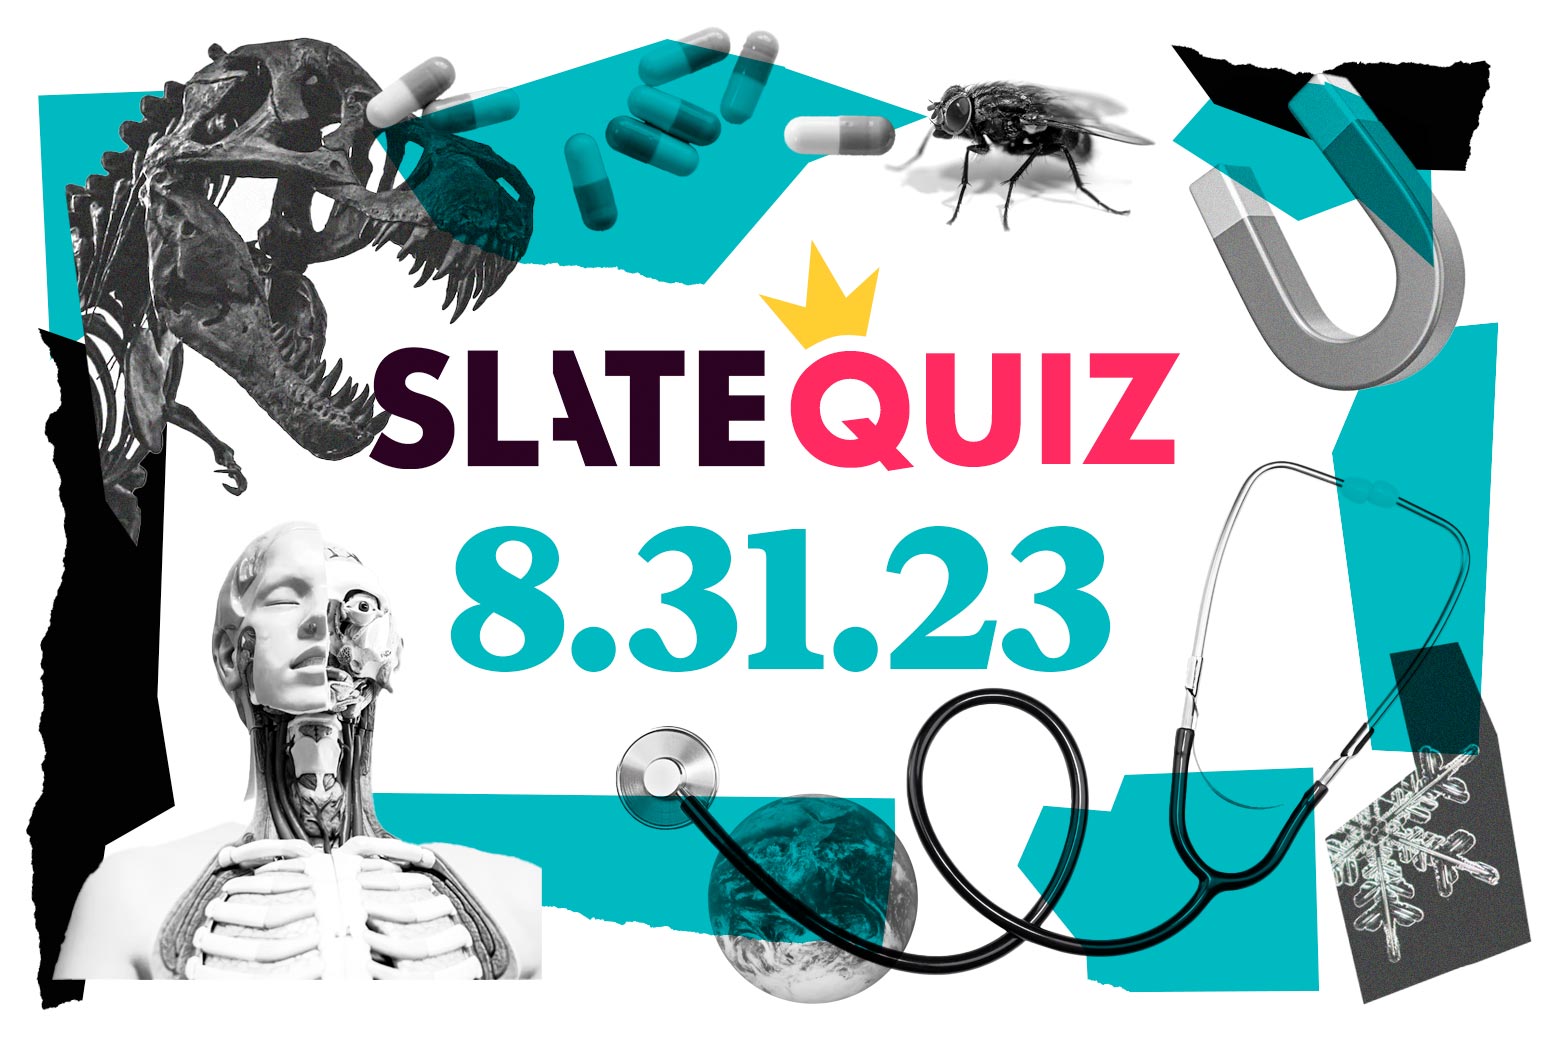 Think You’re Pretty Smart? Prove It With Our Daily Quiz.